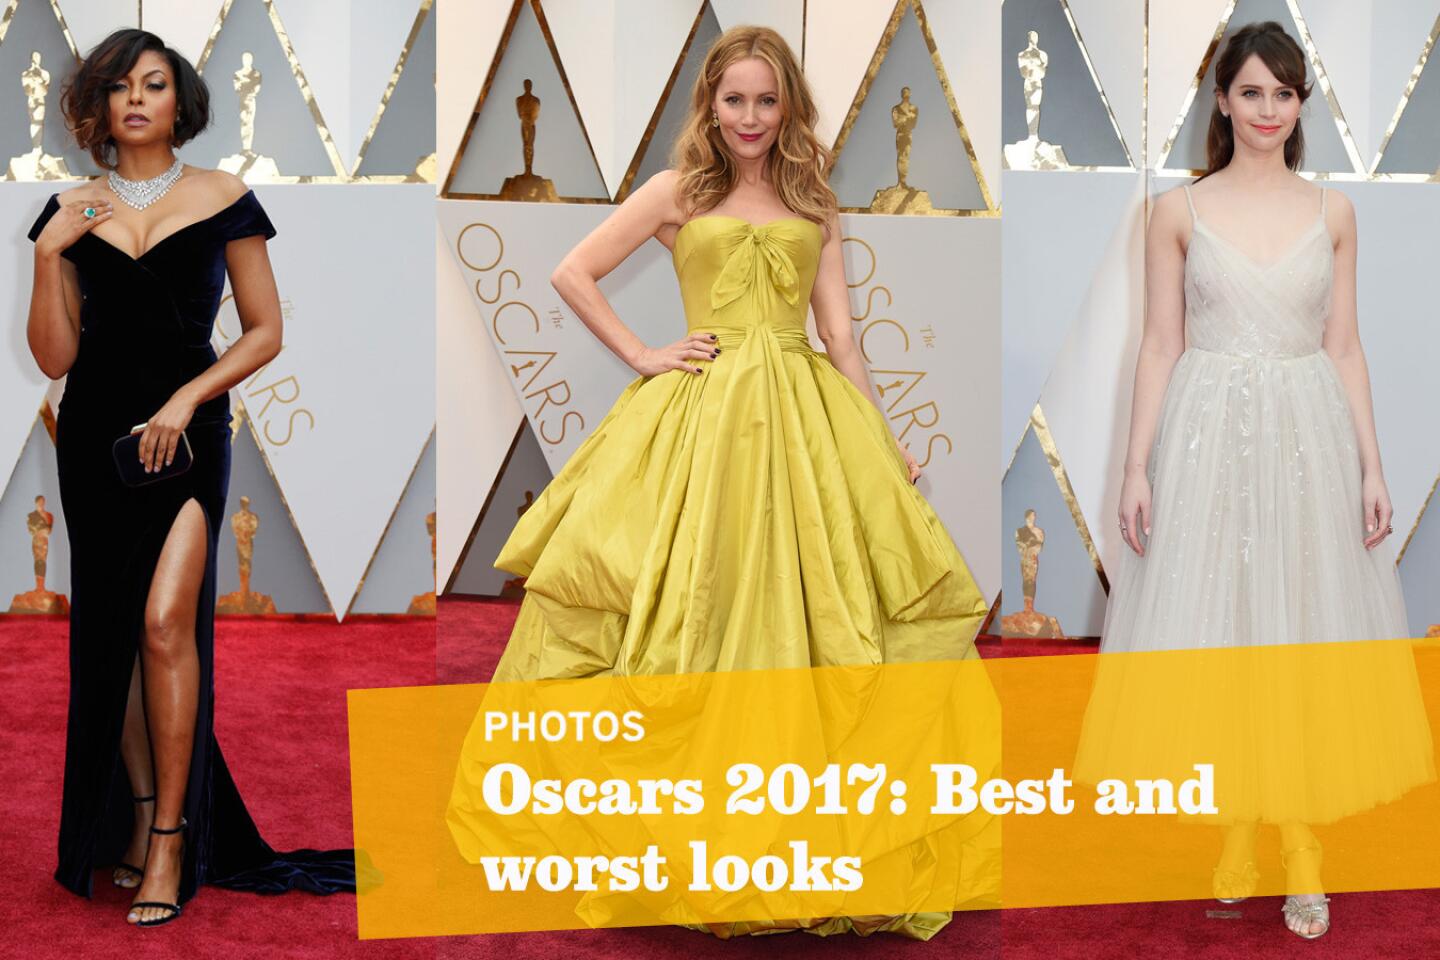 Oscars 2017: Best- and worst-dressed